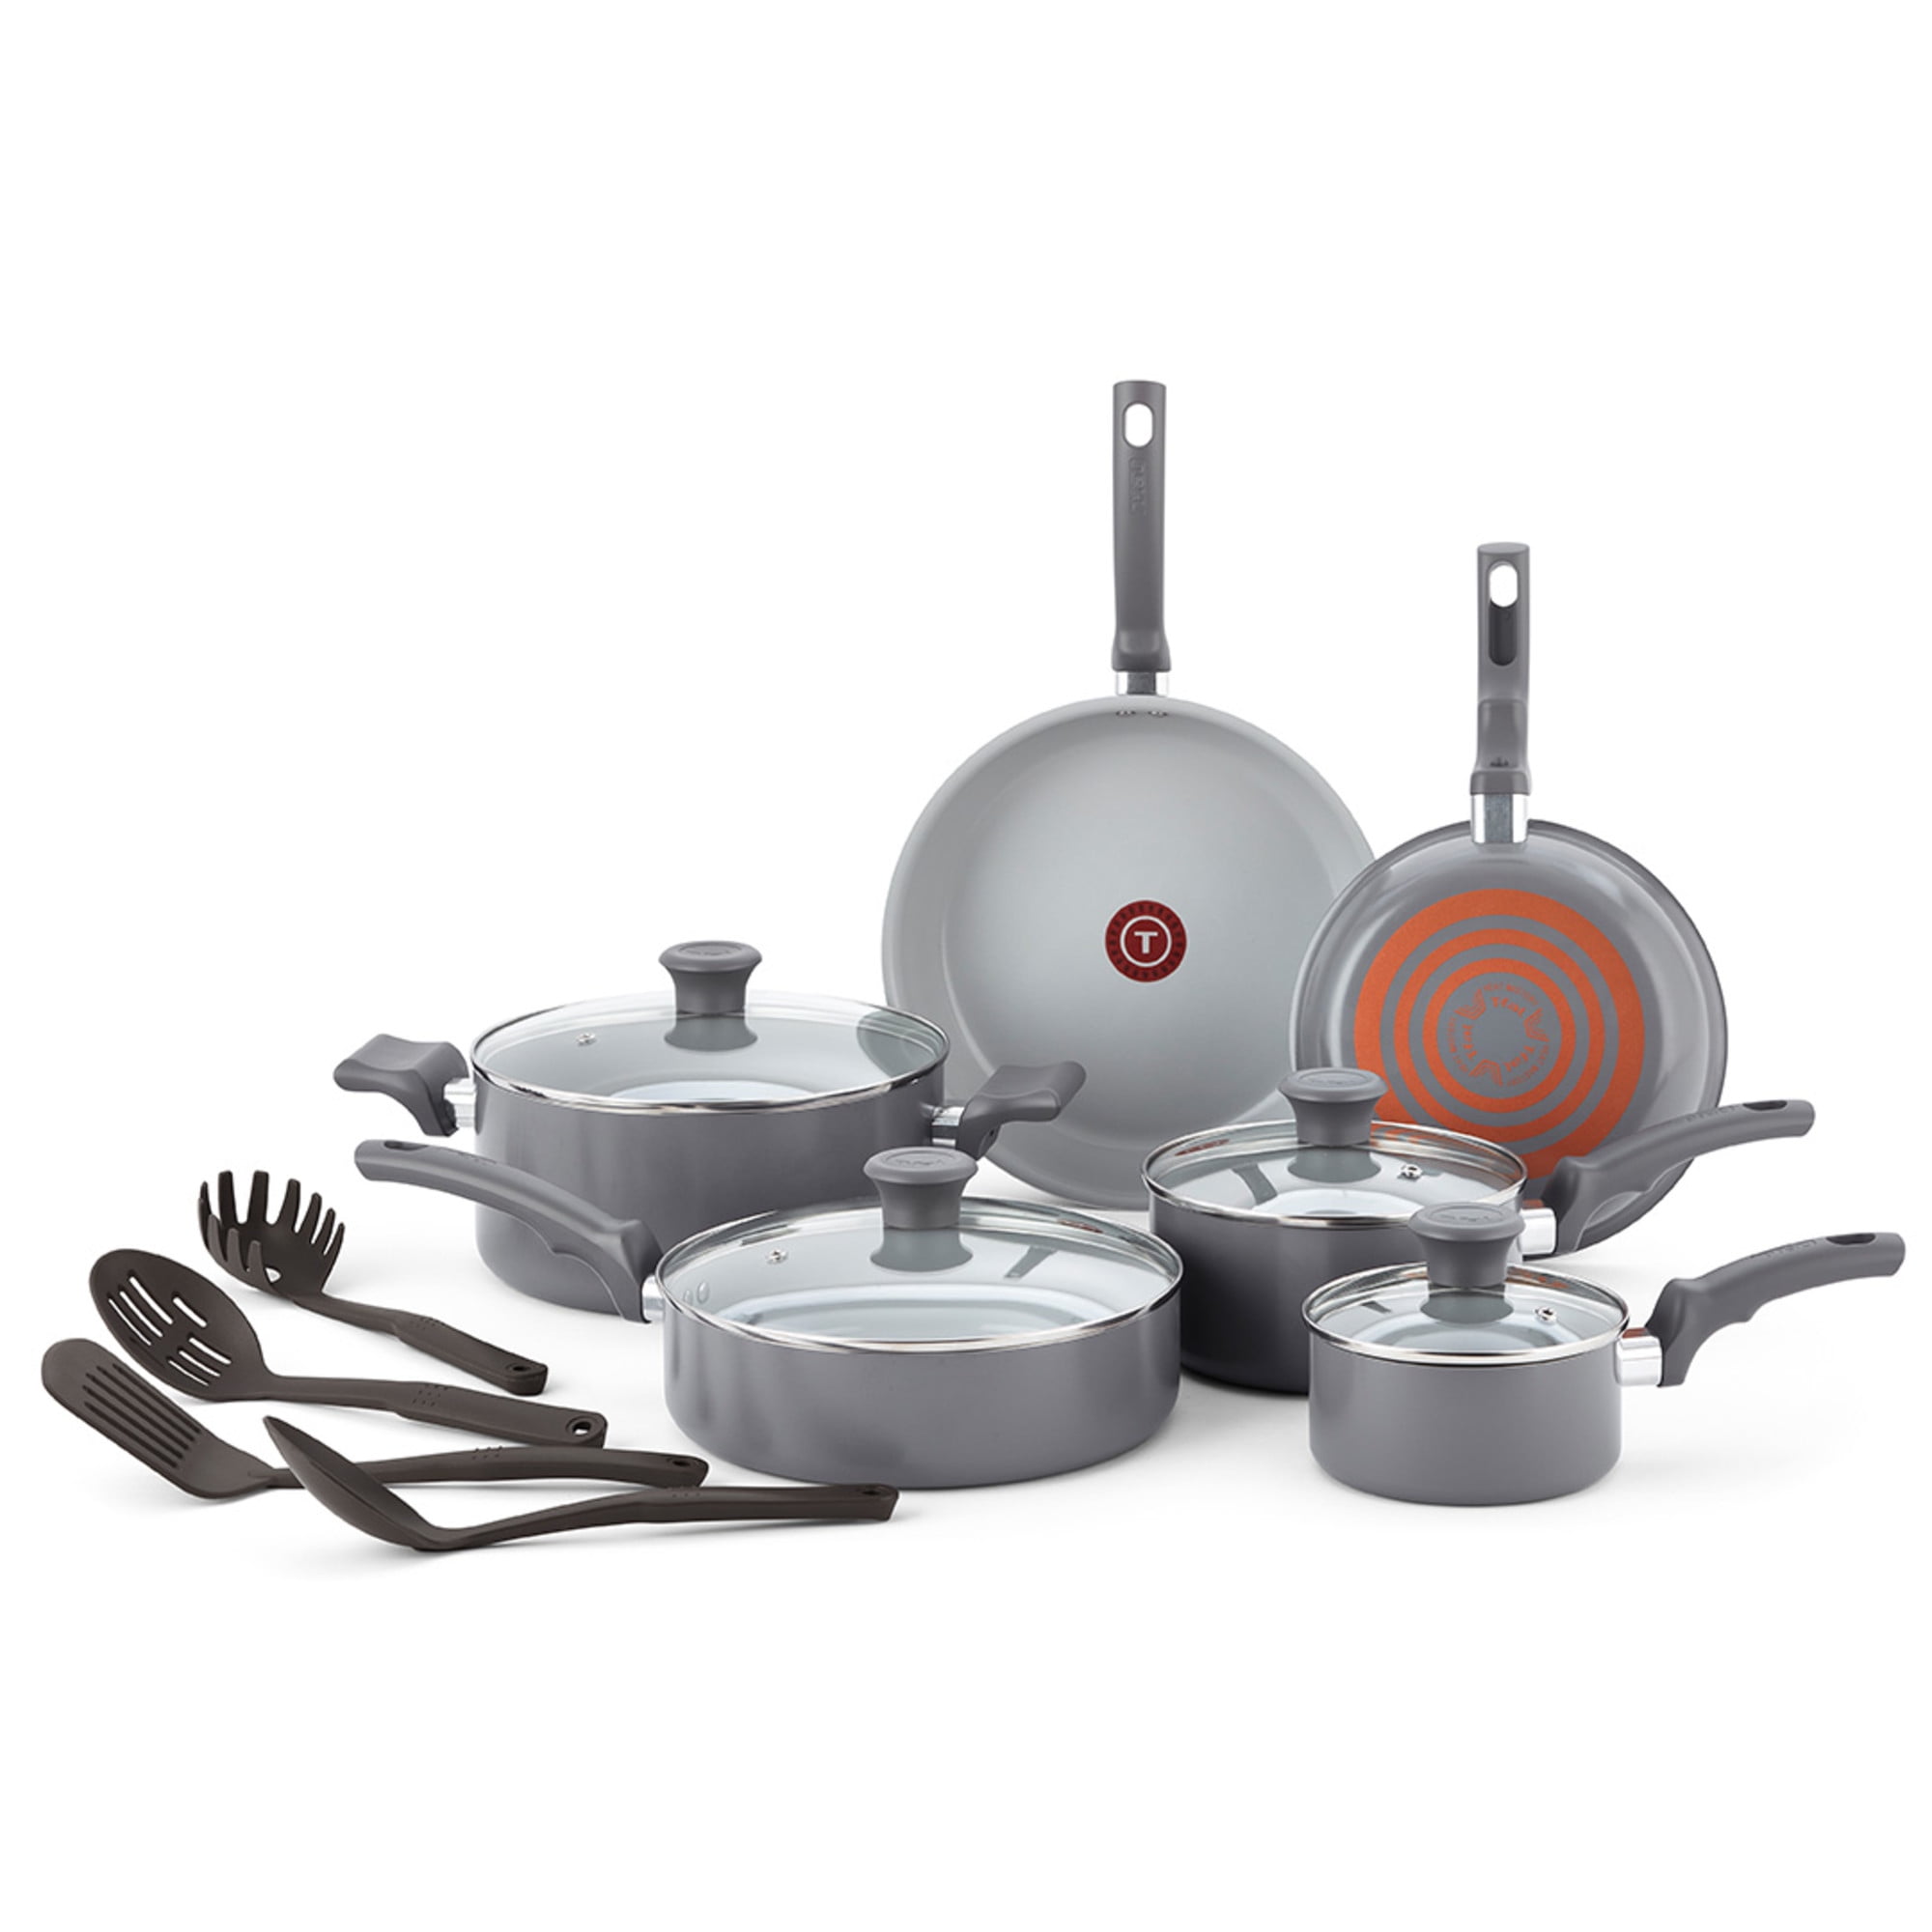 T-fal Fresh Ceramic Nonstick Cookware Set, Recycled Aluminum, 14 piece, Dishwasher Safe